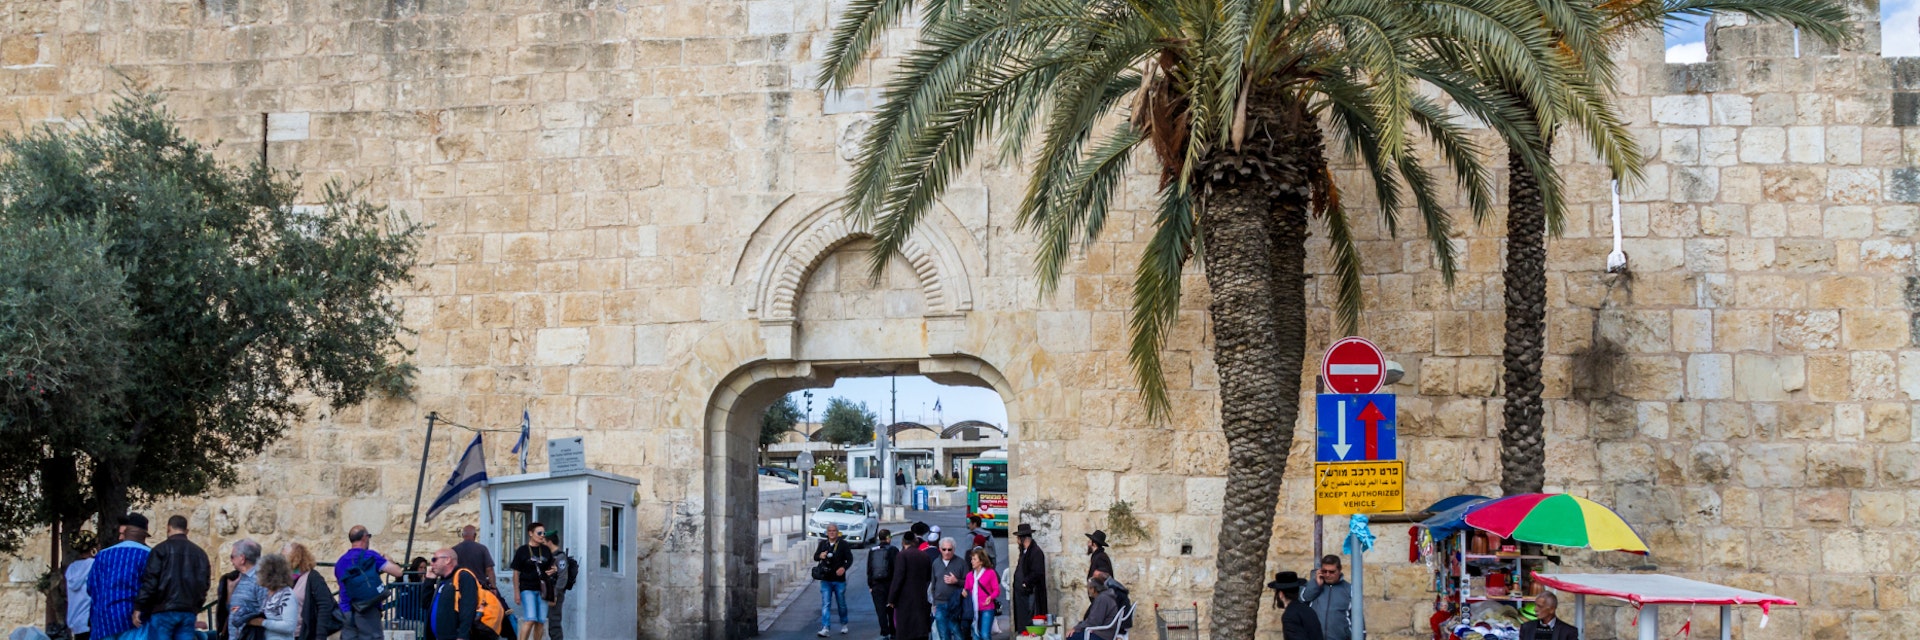 JERUSALEM, ISRAEL - DECEMBER 8: The Dung Gate, entrance to the Old City near the Western Wall on the Temple Mount in Jerusalem, Israel on December 8, 2016; Shutterstock ID 575368675; Your name (First / Last): Lauren Keith; GL account no.: 65050; Netsuite department name: Online Editorial; Full Product or Project name including edition: Israel Update 2017